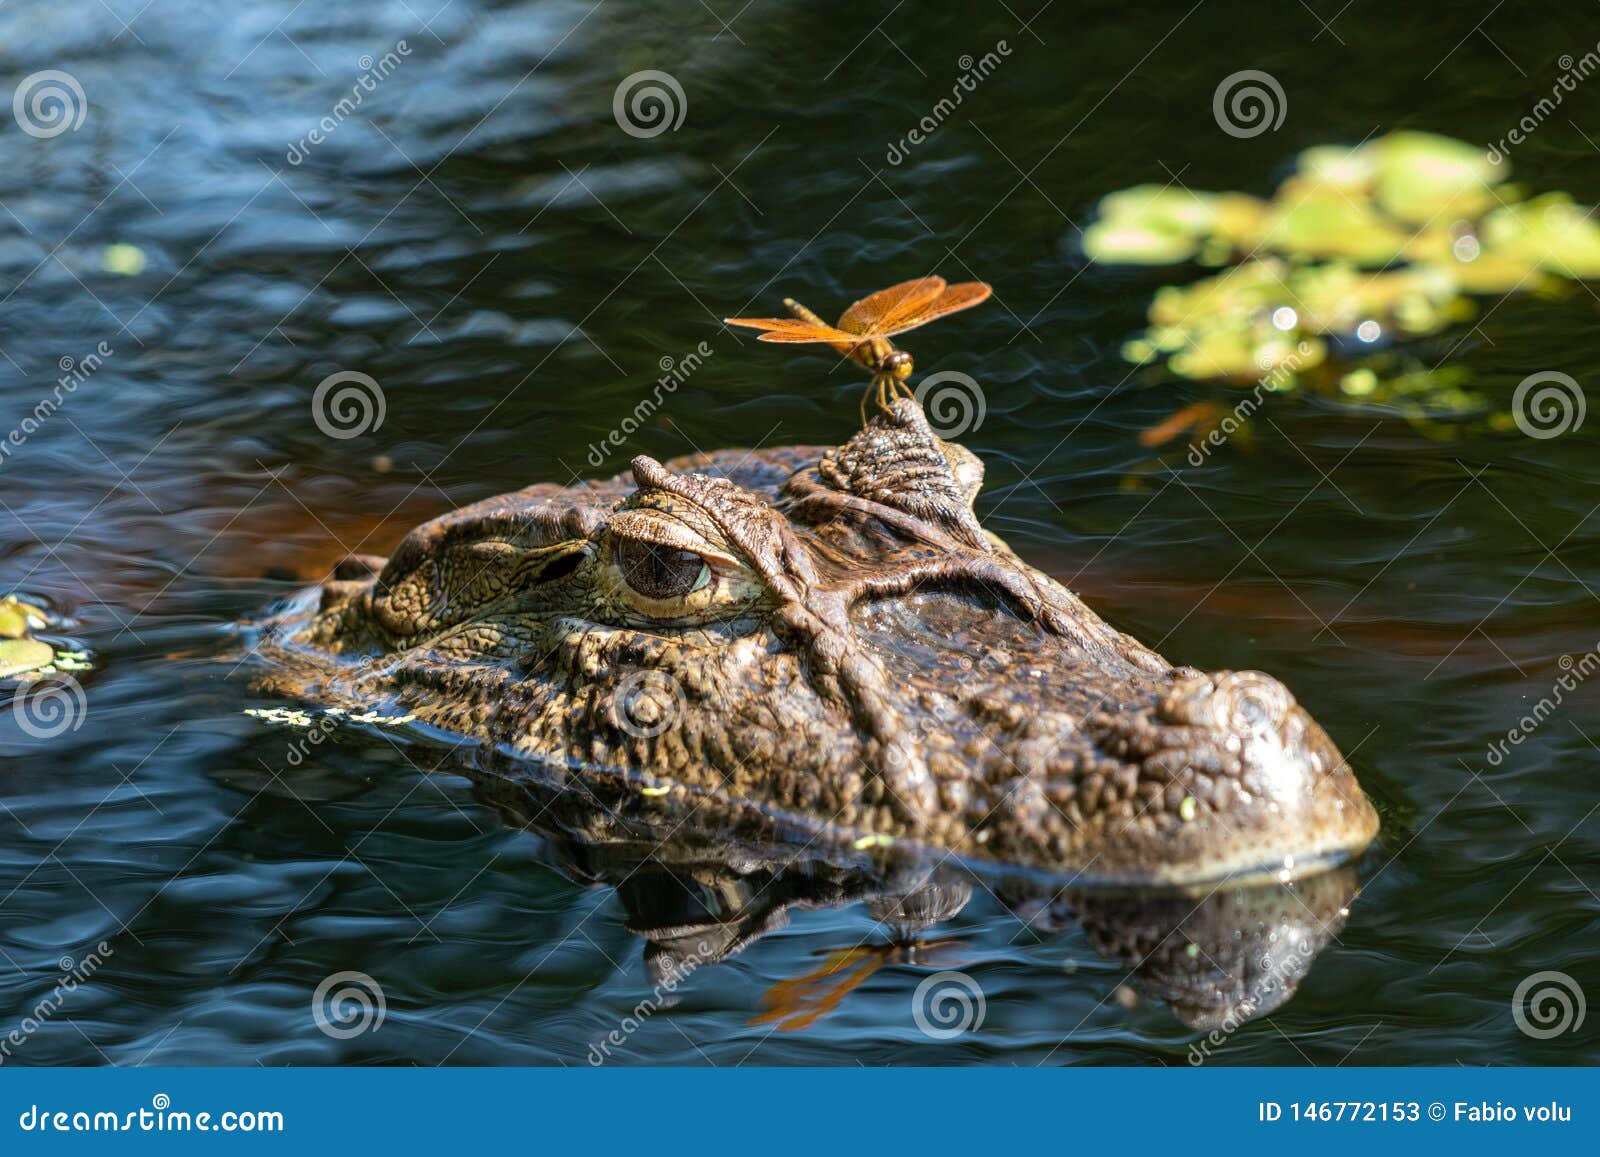 close up of dragonfly on the head of an aligÃÂ¡tor  caiman latirostris yacare caiman, caiman crocodilus yacare jacare, in the rive